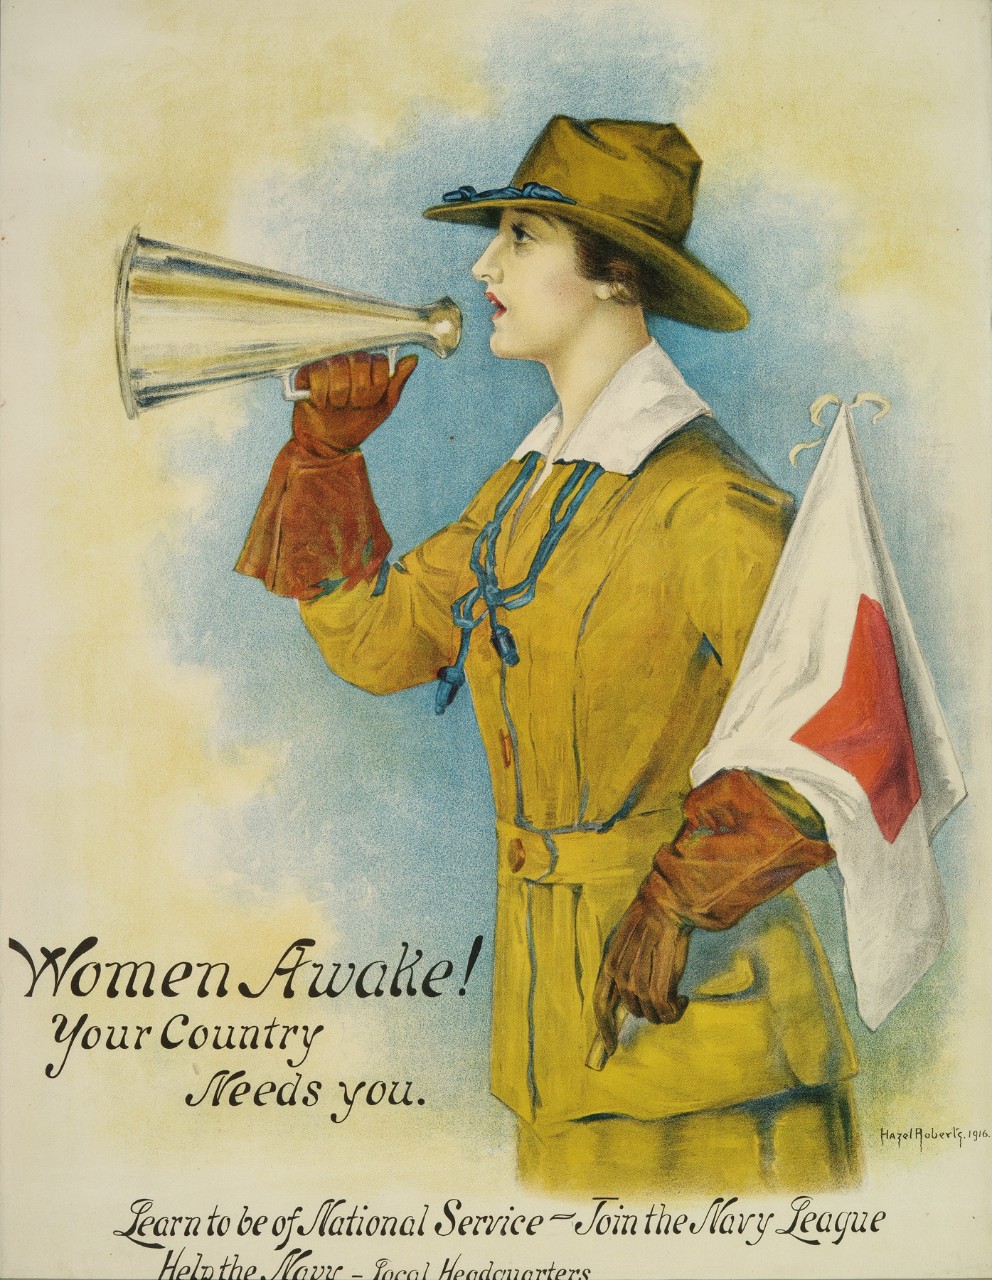 A woman in uniform holds a flag and she is playing a bugle